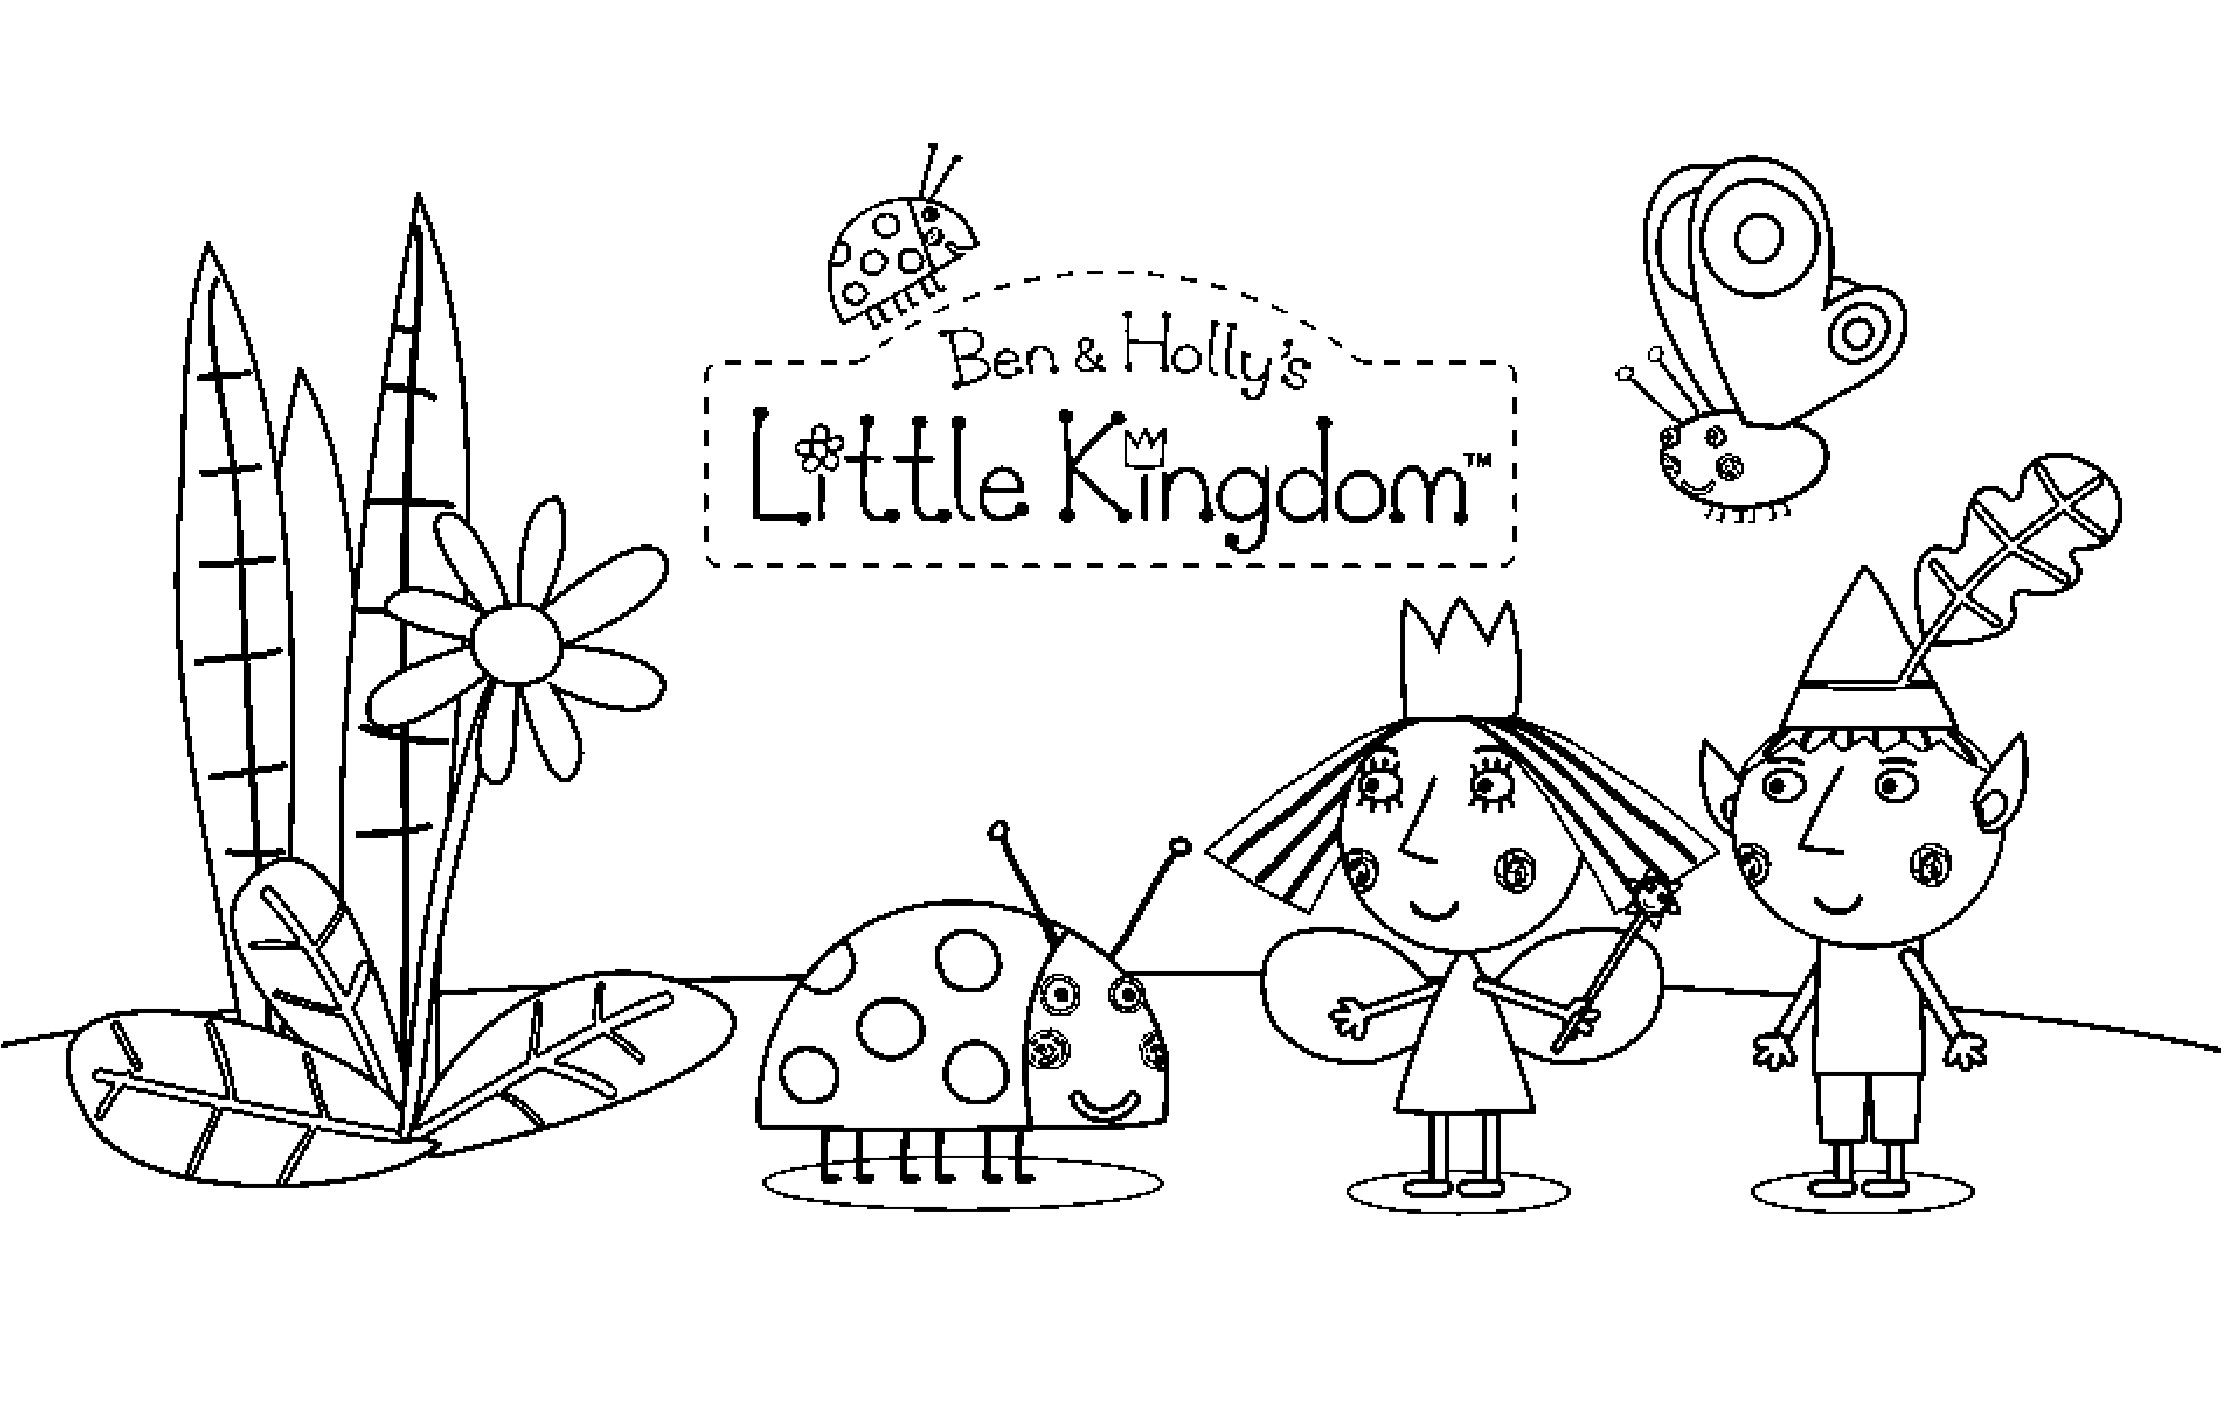 Ben And Holly Coloring Pages
 Ben and Holly Coloring for kids Coloring pages for kids